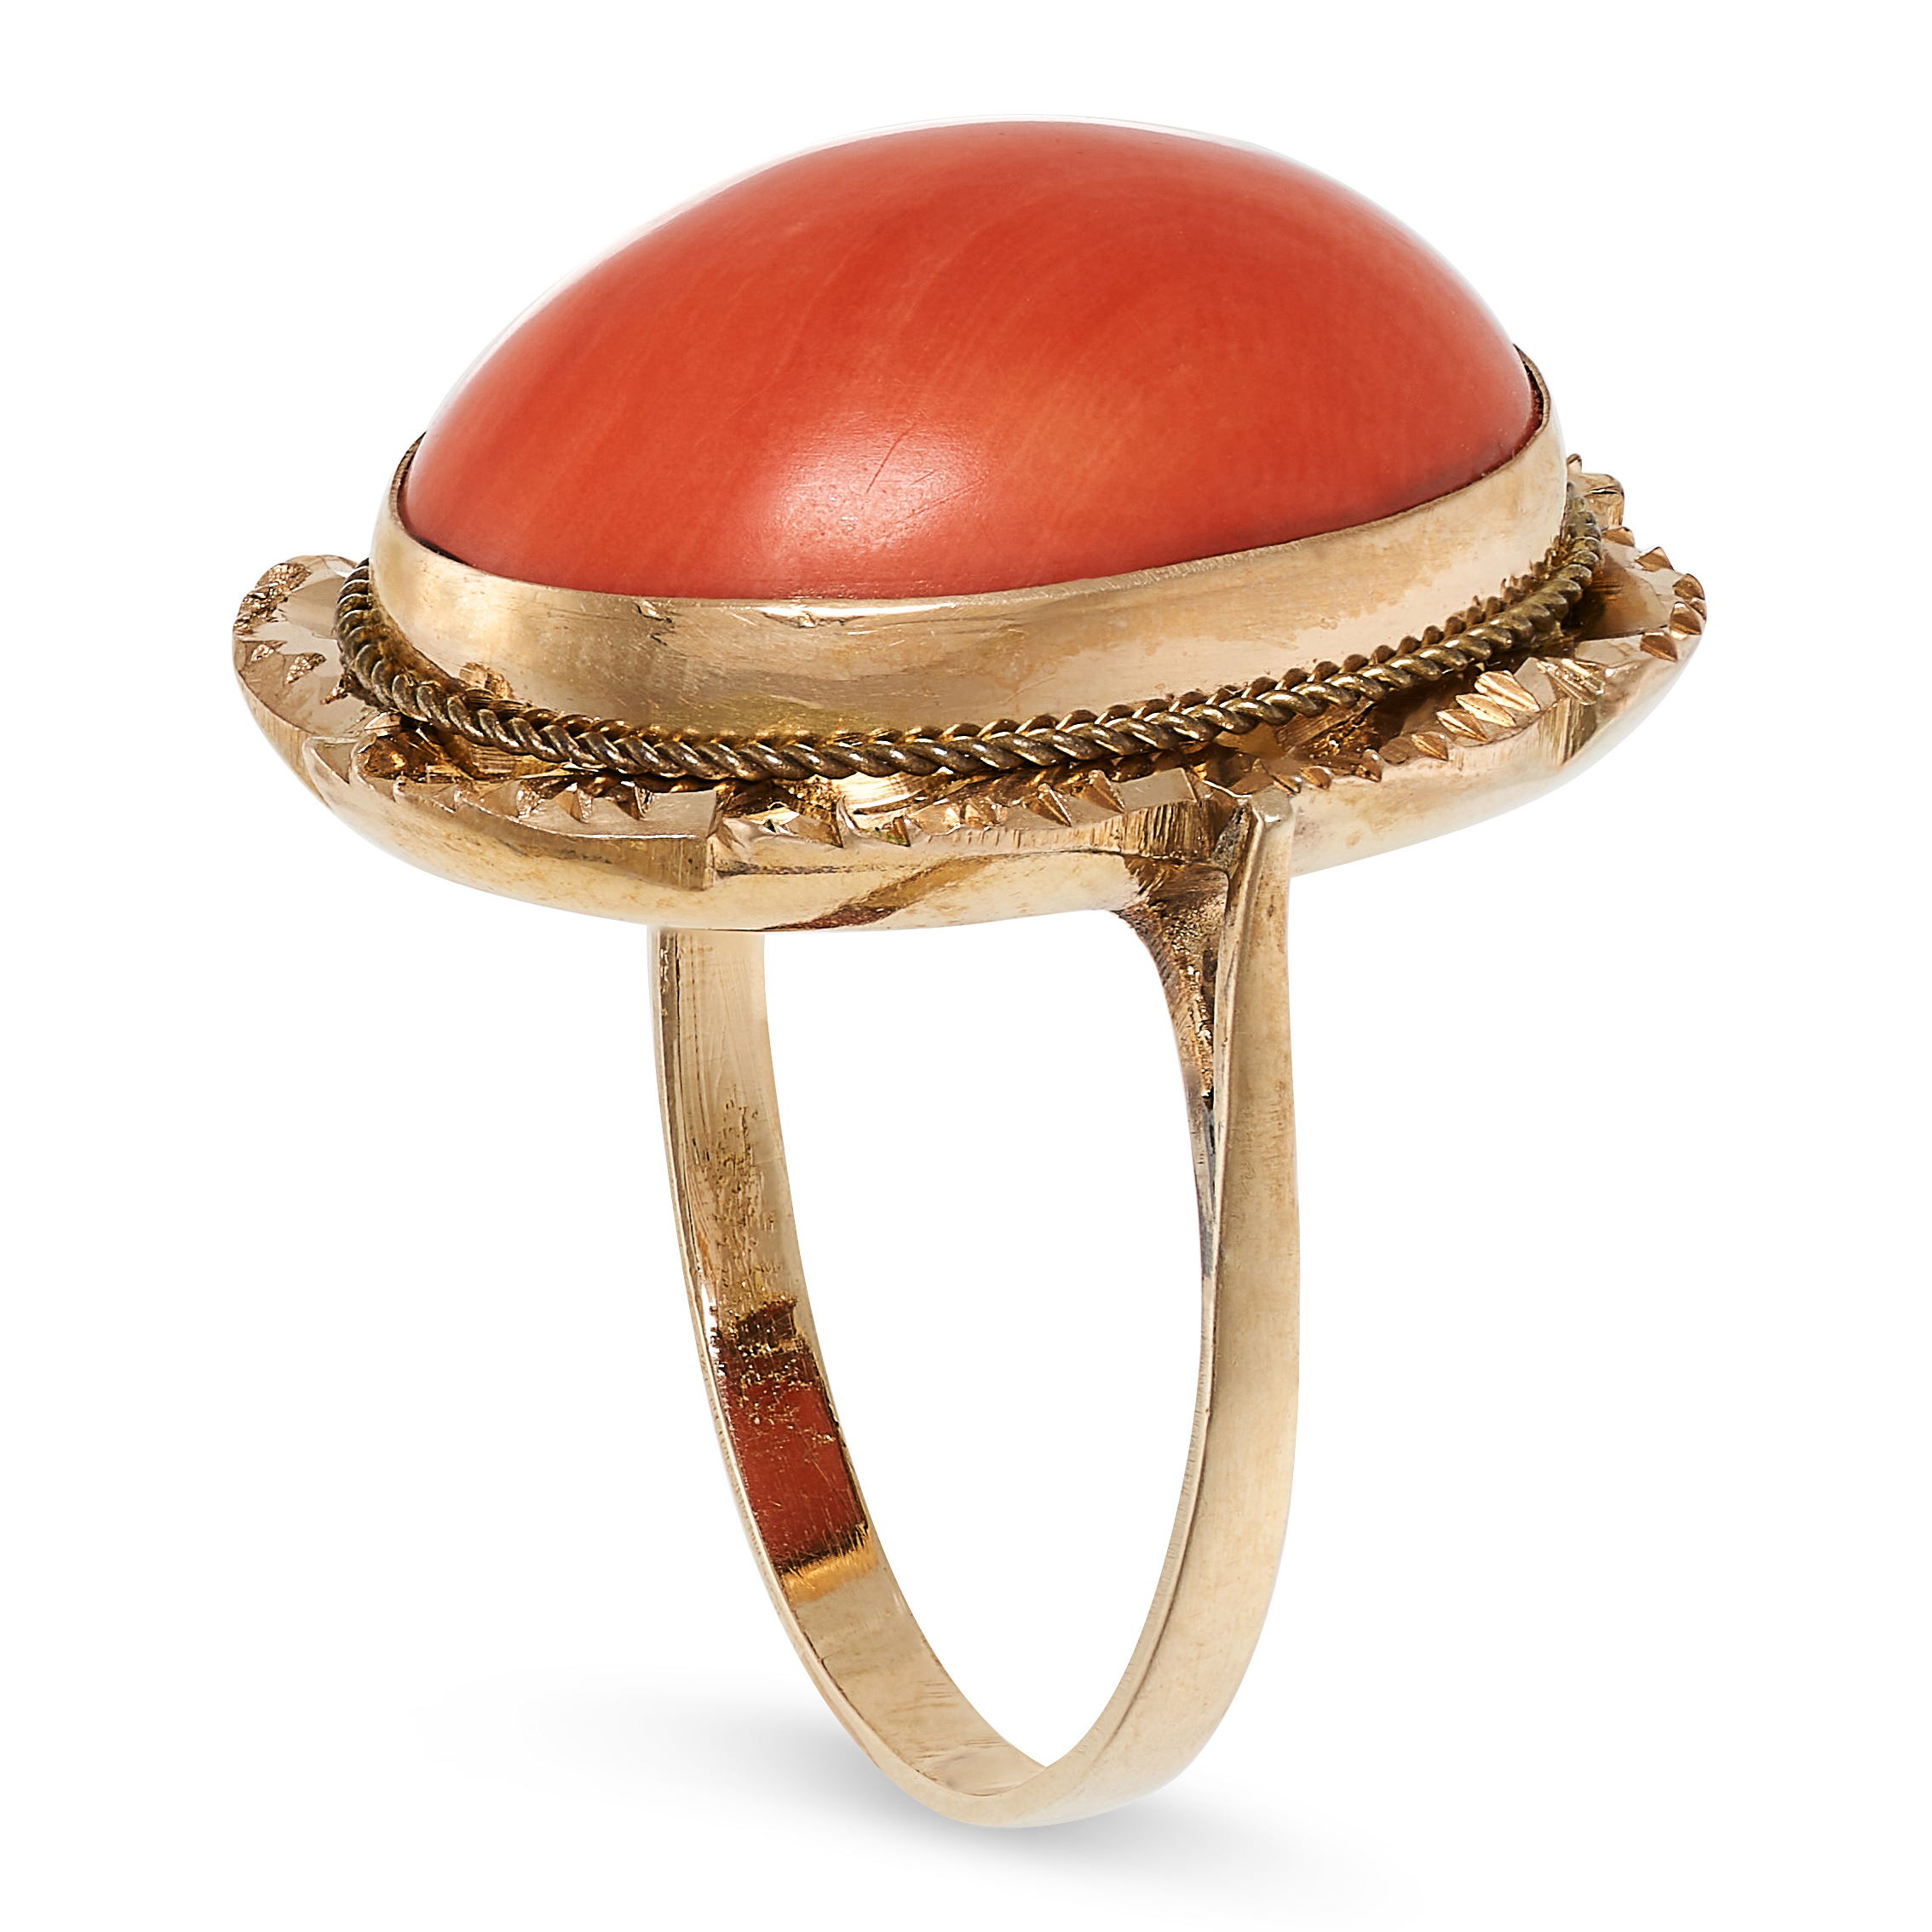 A VINTAGE CORAL RING in yellow gold, set with a cabochon coral, no assay marks, size M / 6, 4.8g. - Image 2 of 2